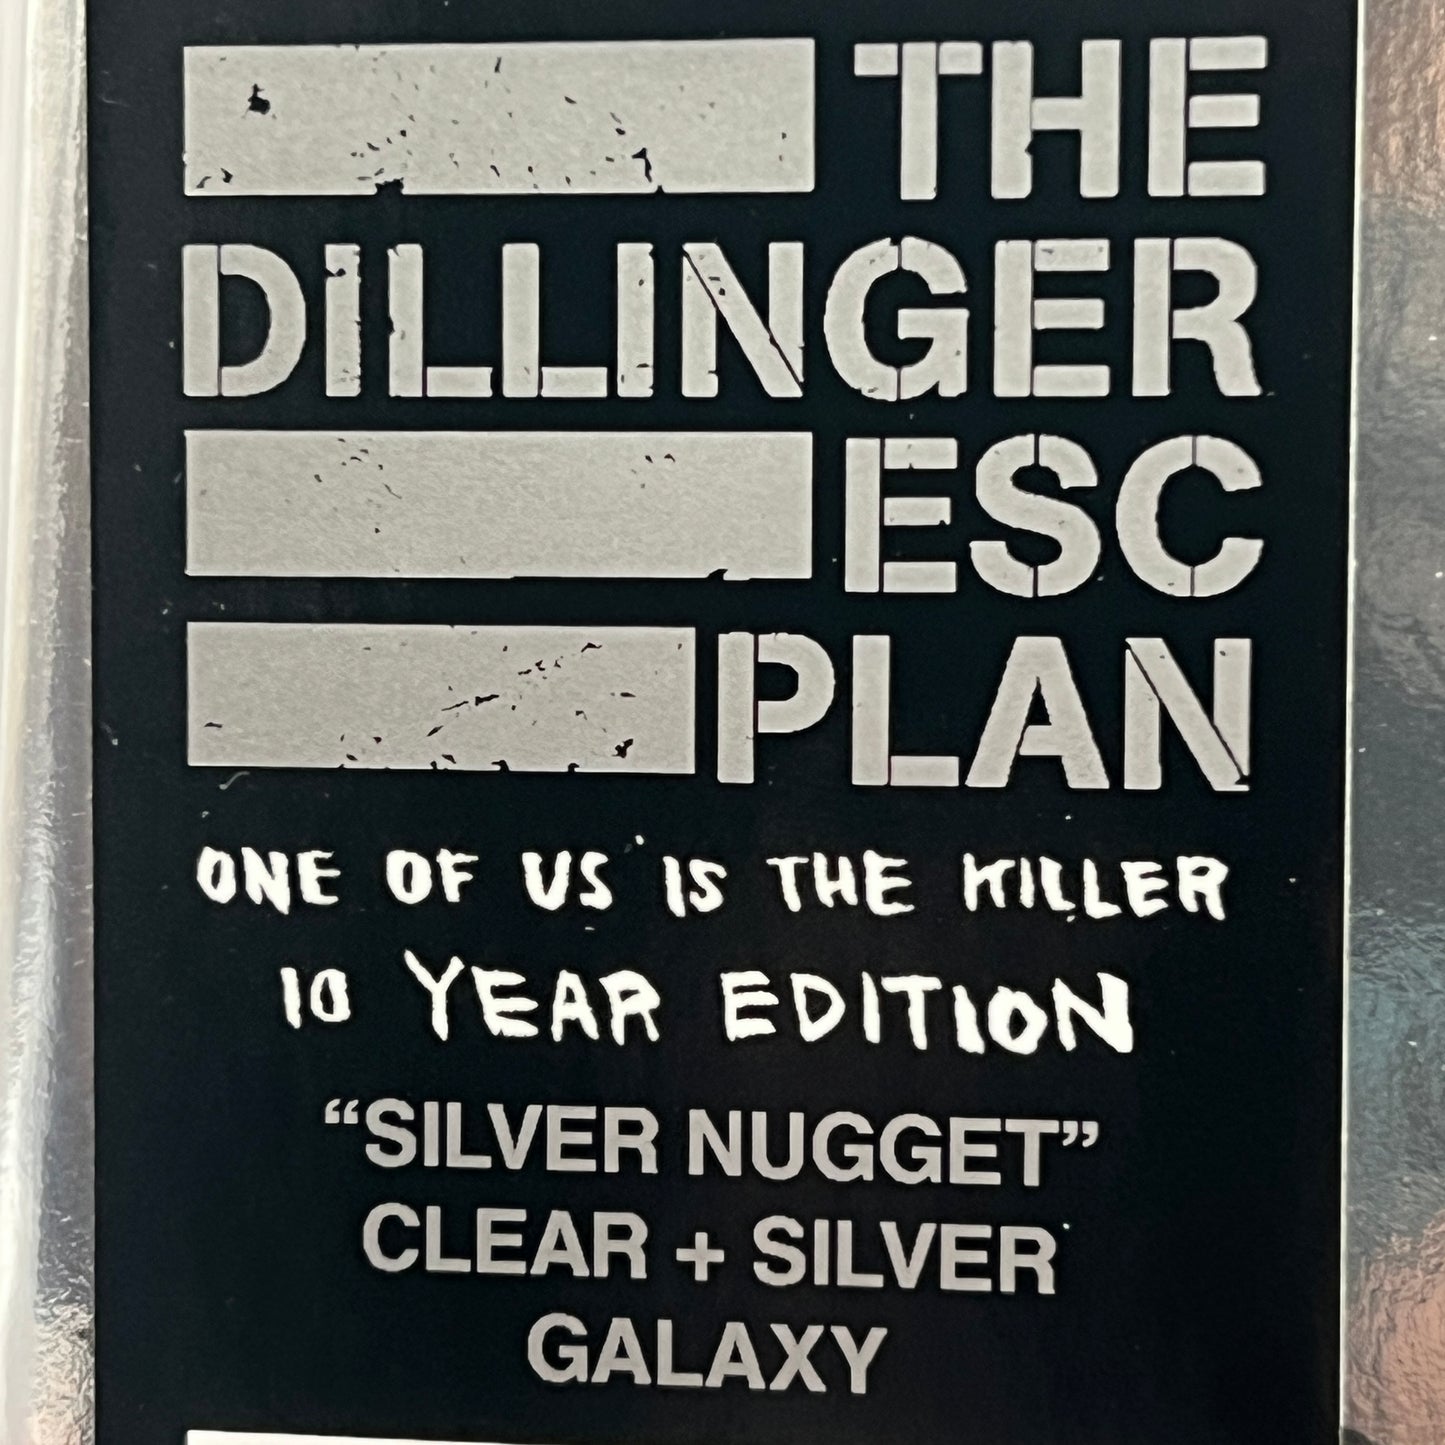 The Dillinger Escape Plan - One Of Us Is The Killer Vinyl LP Clear and Silver Galaxy